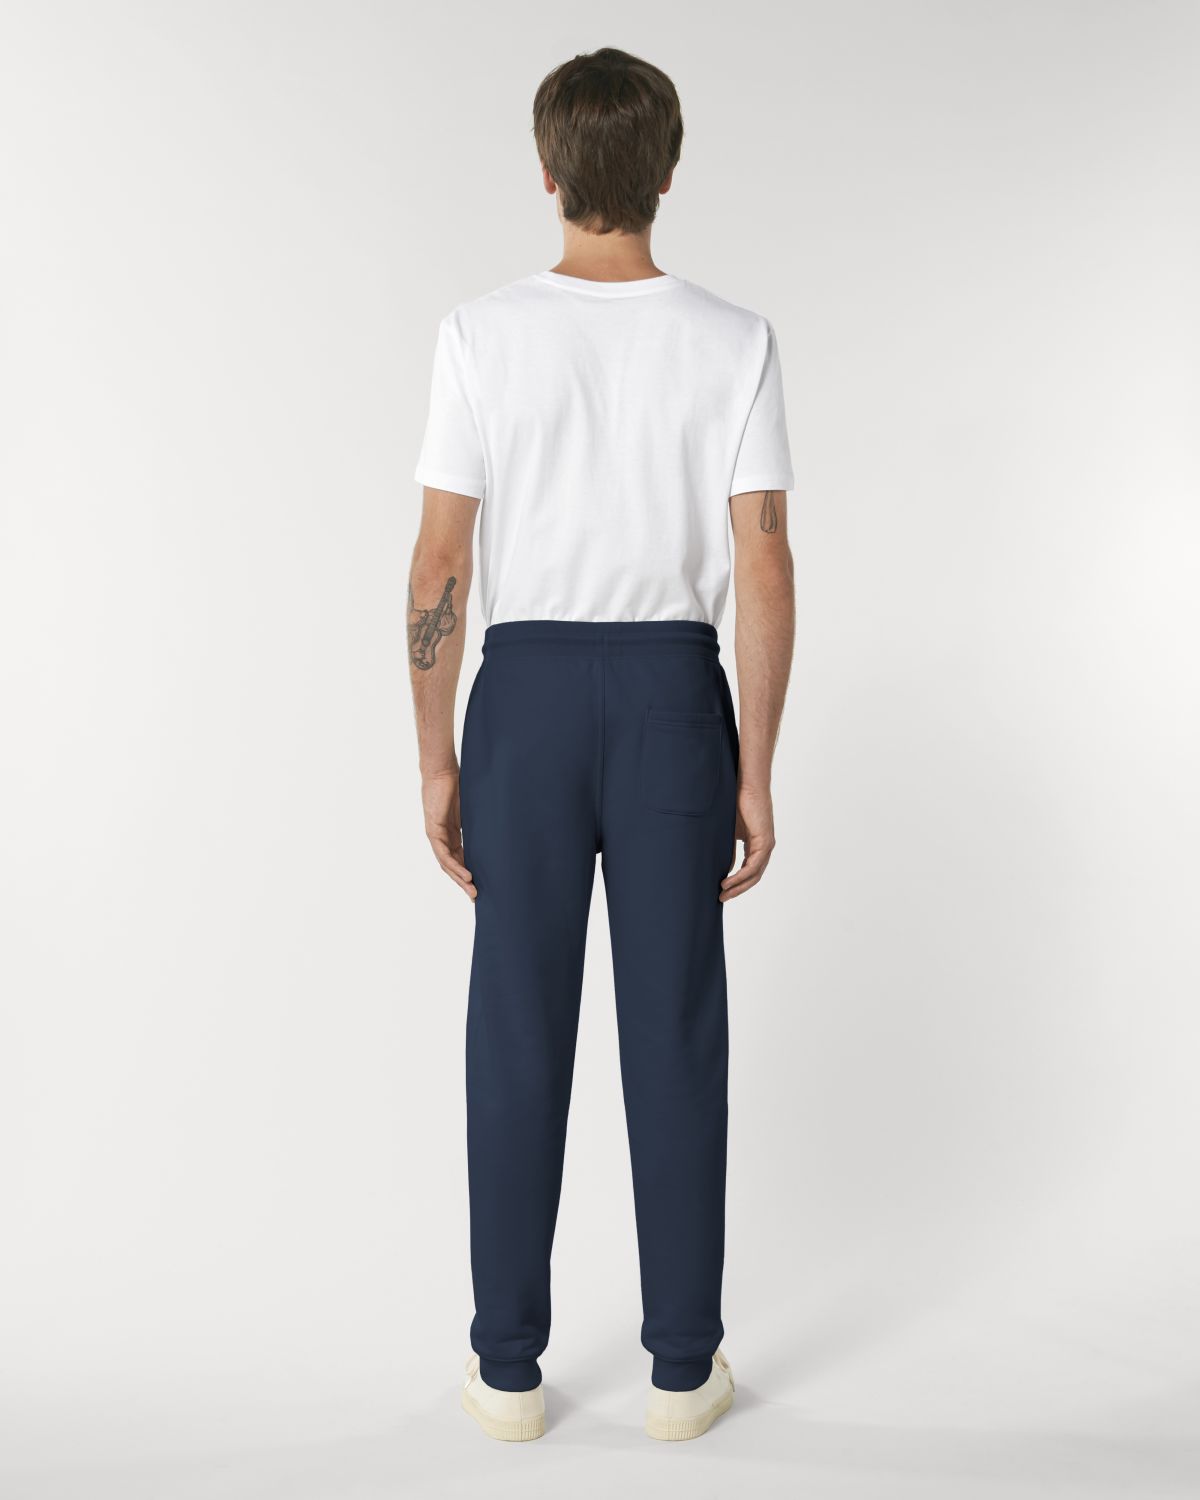 Stanley/Stella's - Mover Jogging Pants - French Navy